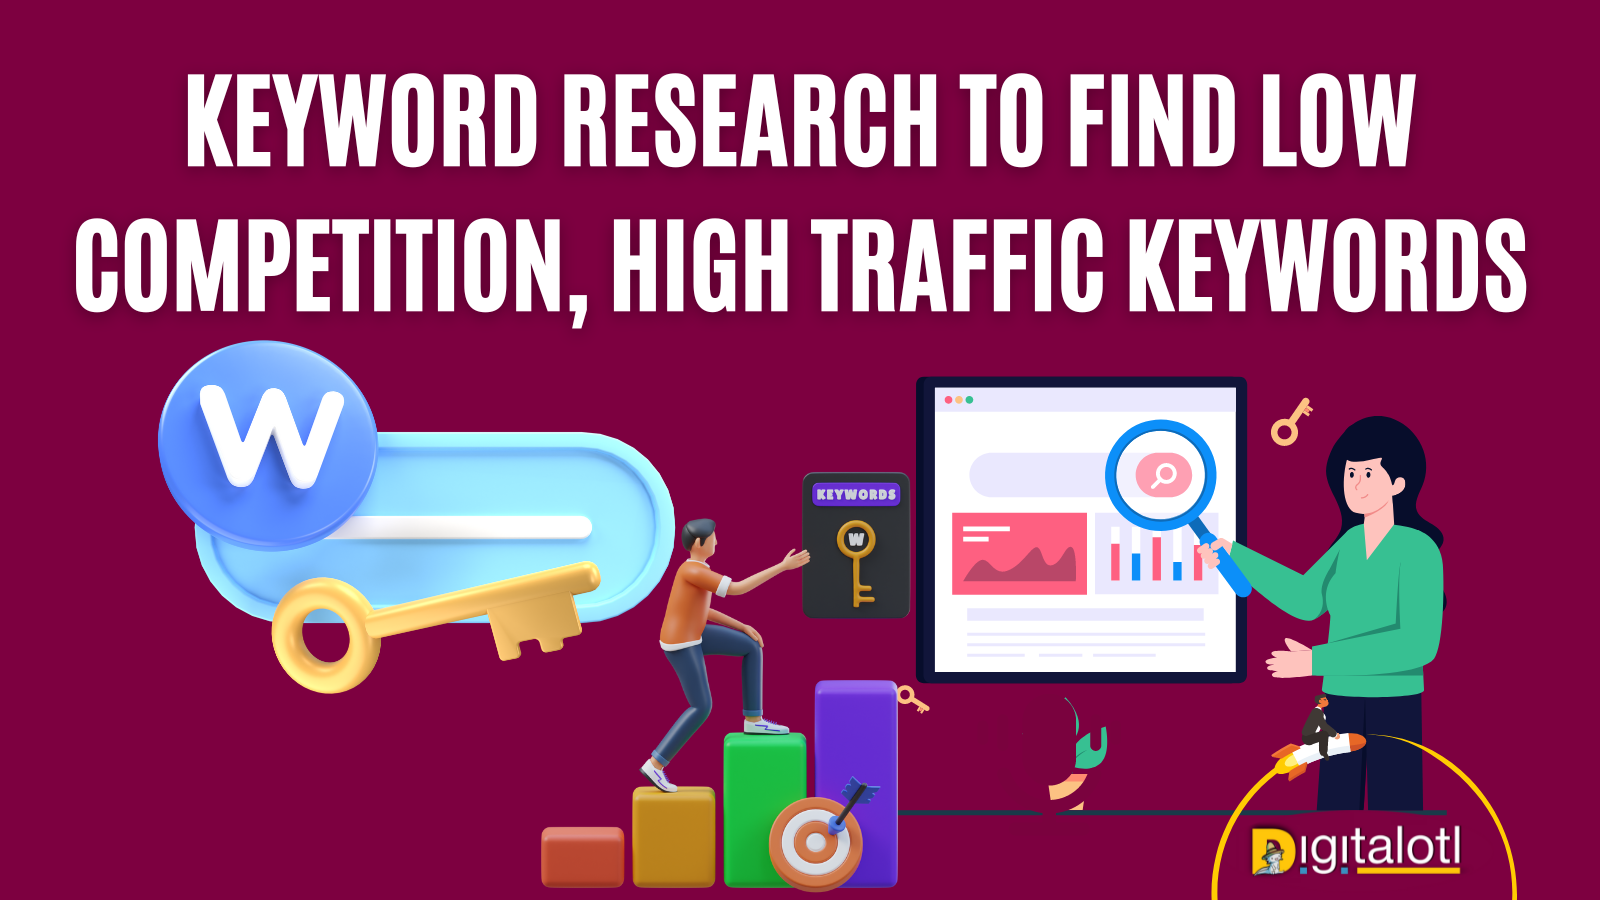 Keyword research to Find Low Competition, High Traffic Keywords Using Free Tools